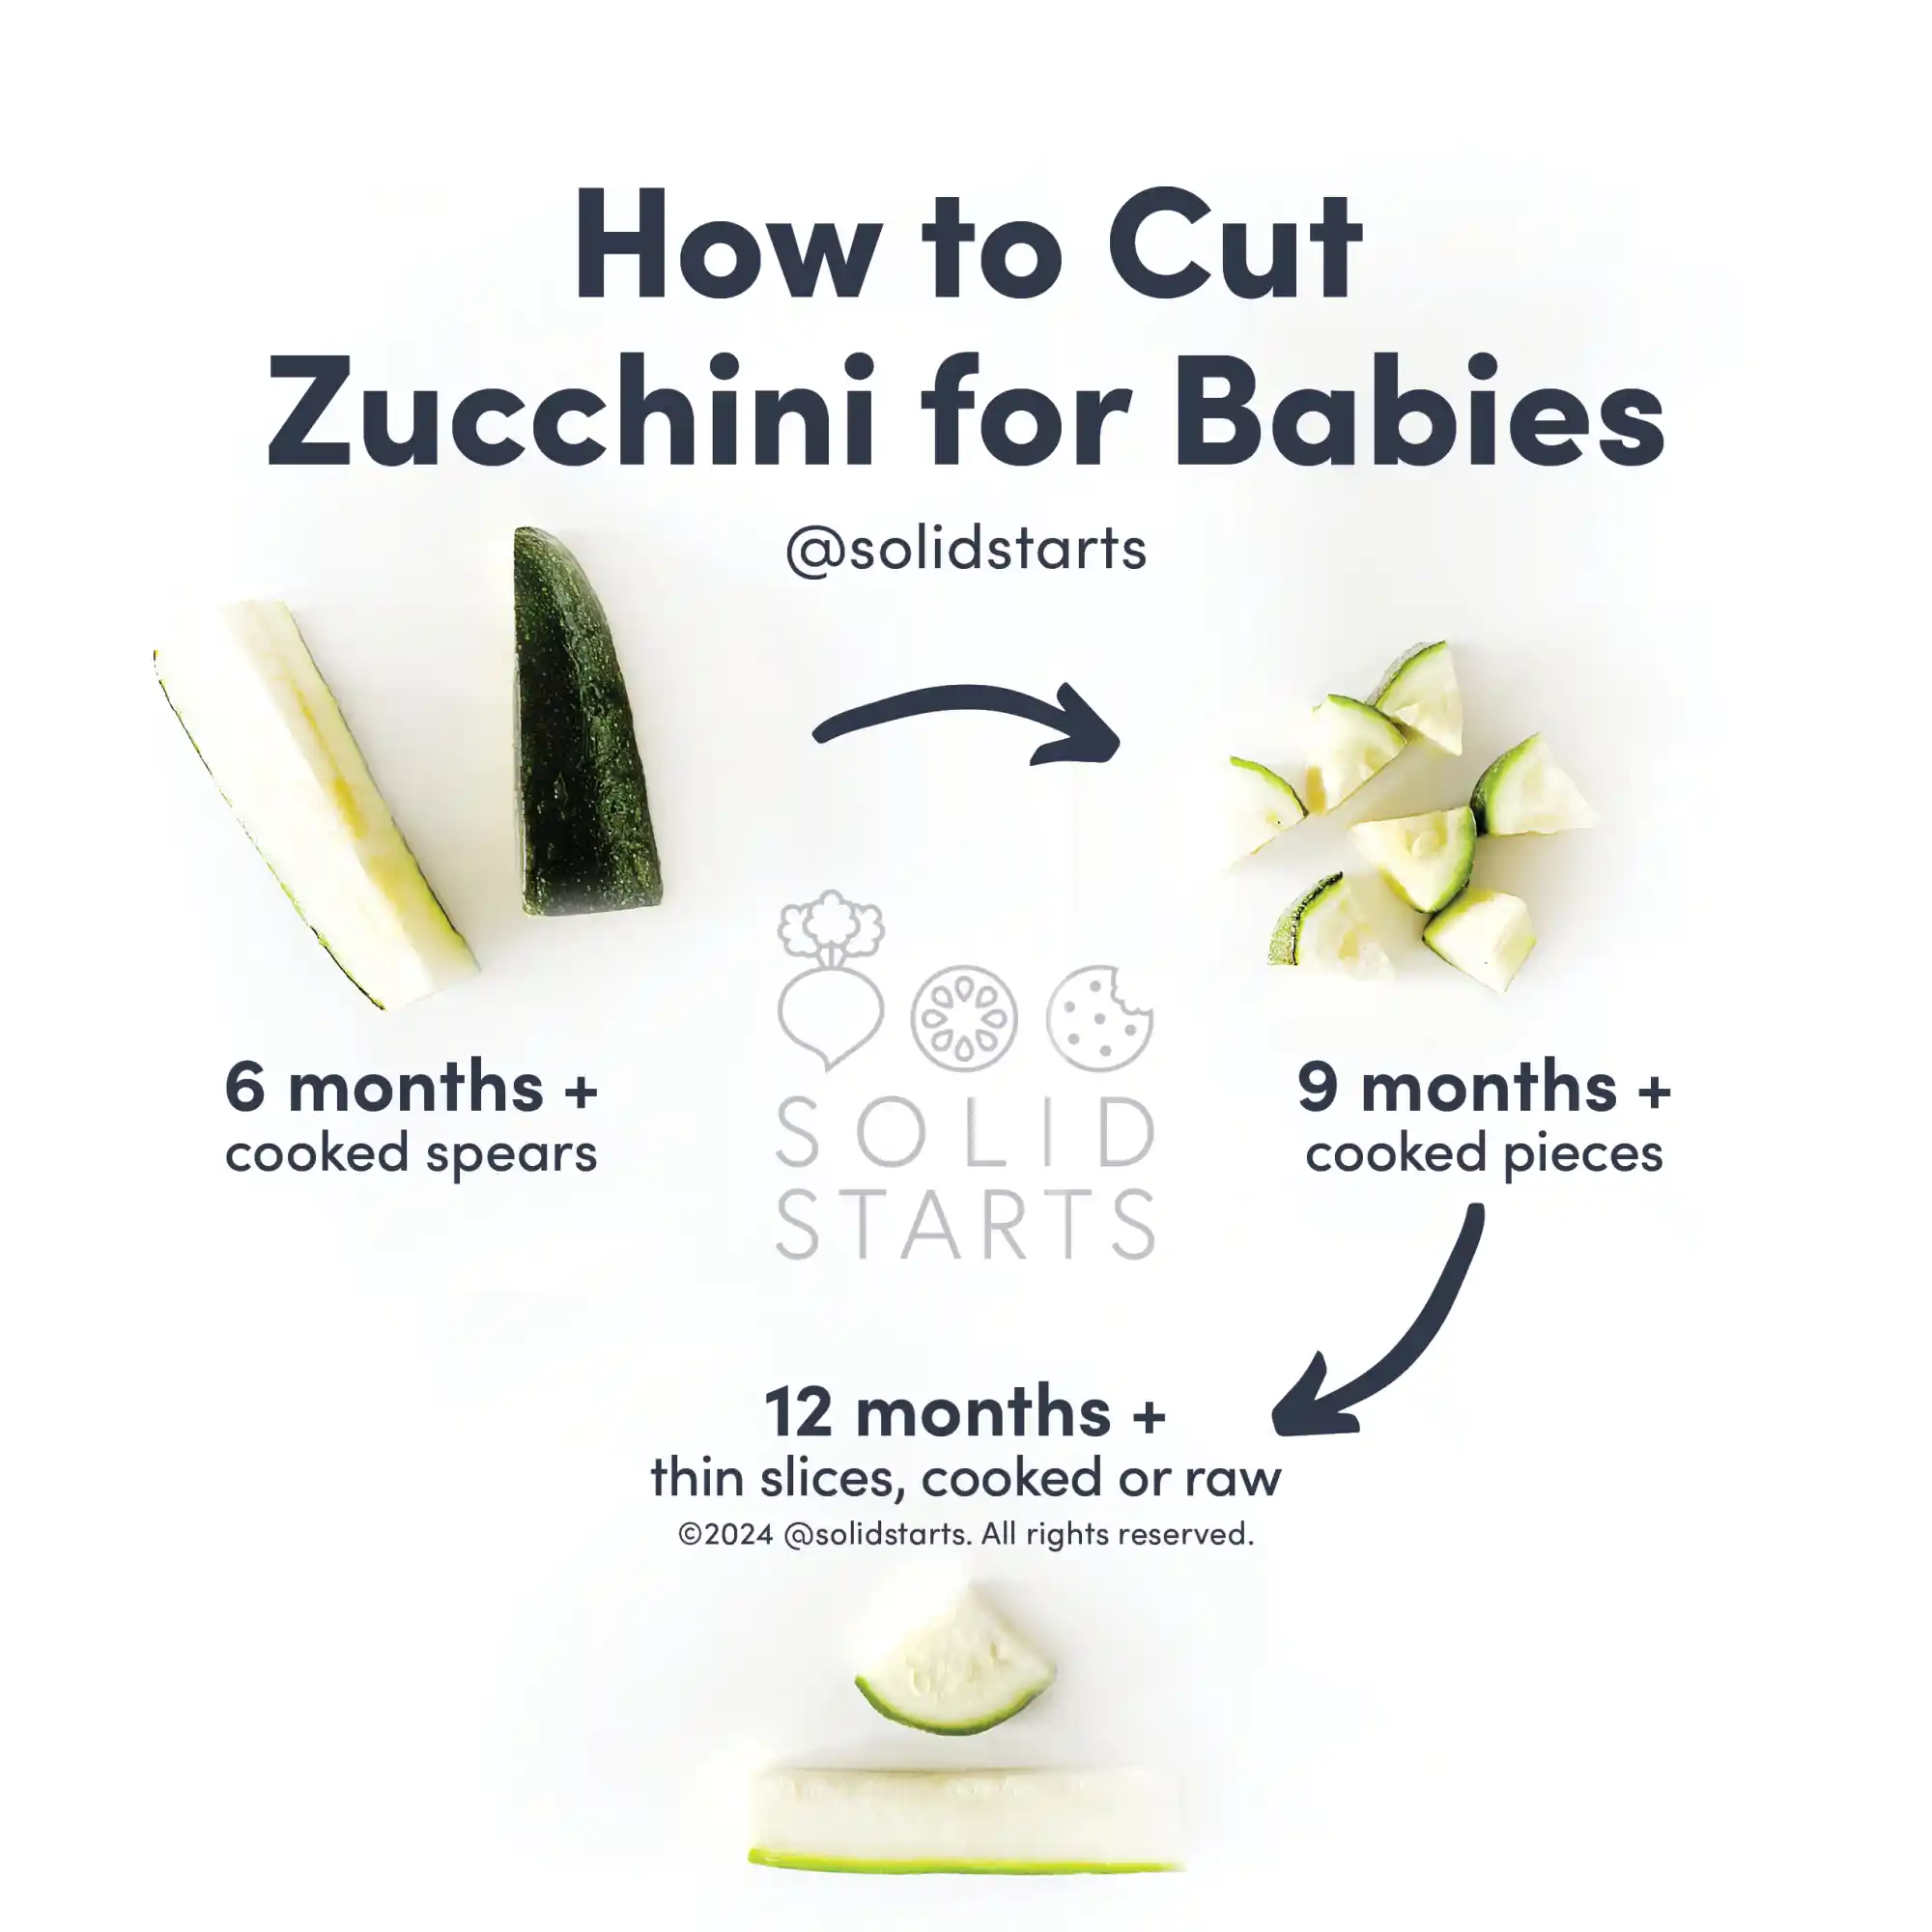 an infographic showing how to cut zucchini for babies by age: cooked spears for 6 months+, cooked bite size pieces for 9 months+, cooked or raw for 12 months+